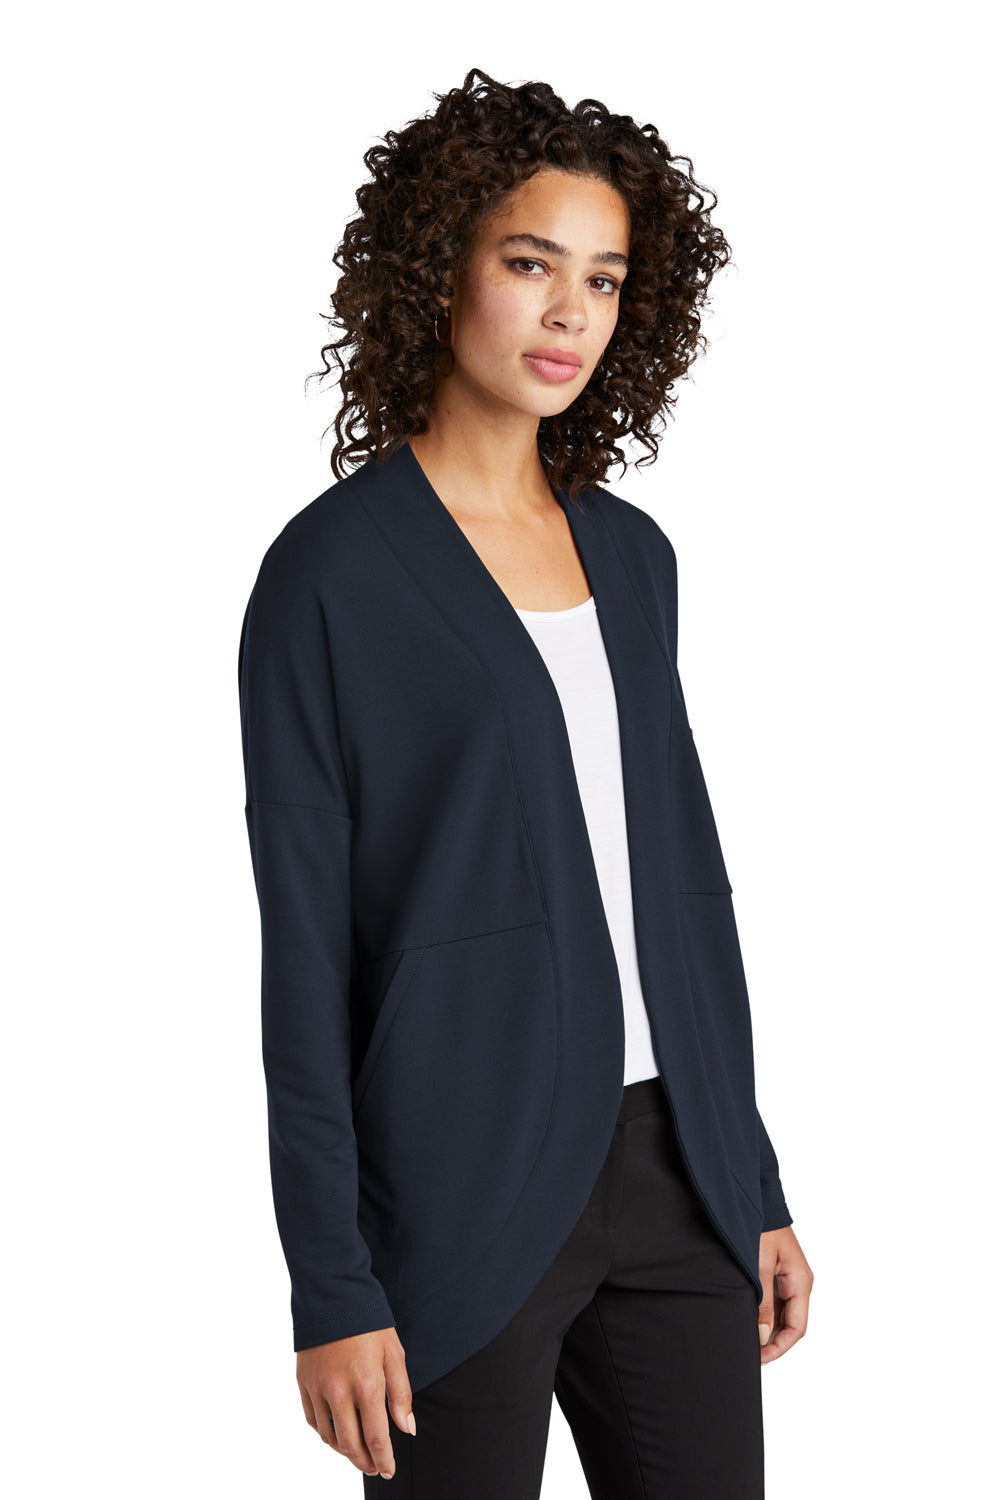 Mercer+Mettle MM3015 Stretch Open Front Long Sleeve Cardigan Sweater Night Navy Blue 3Q